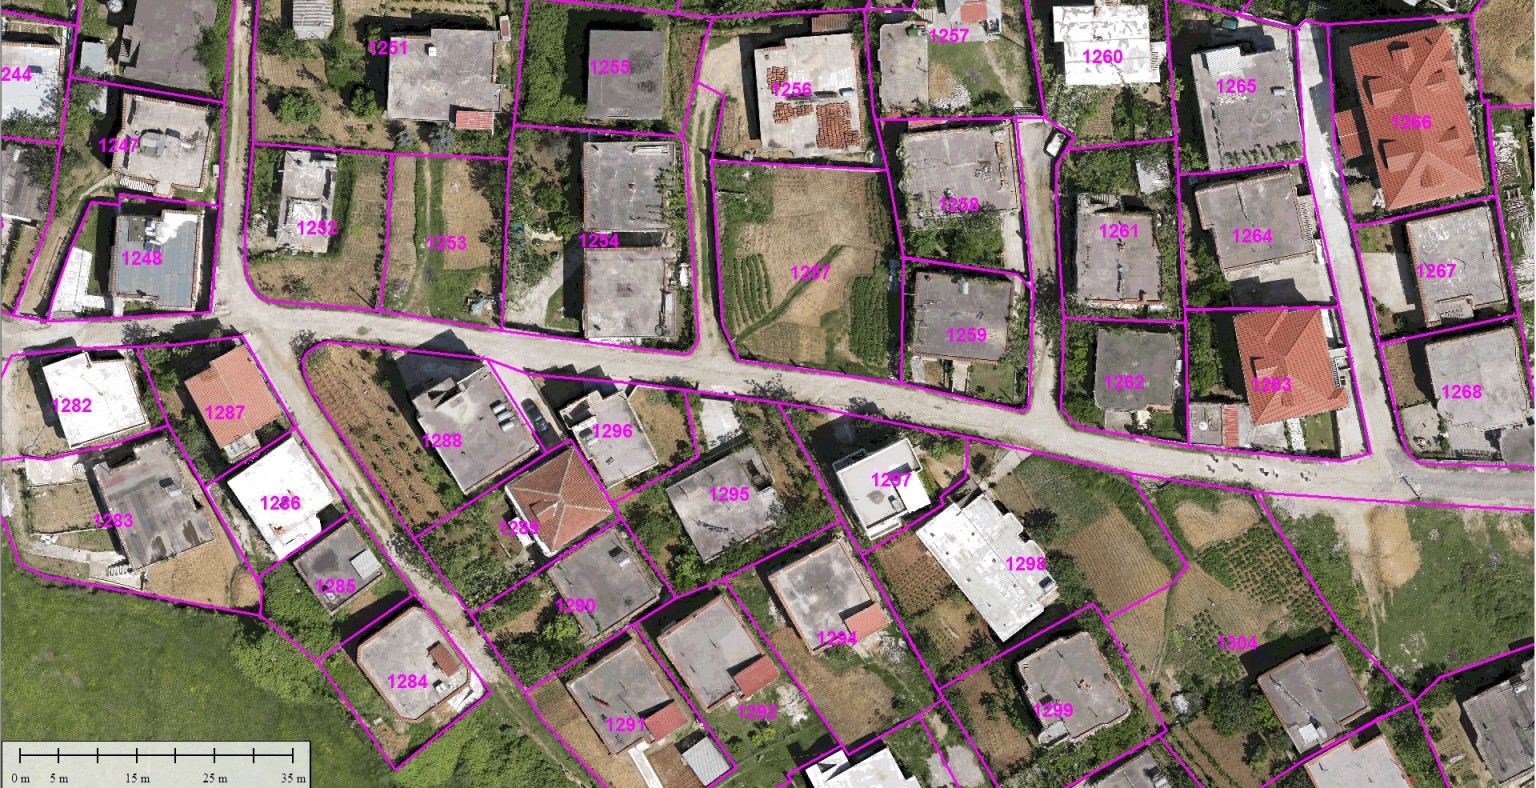  cadastral boundary layer on uav orthophoto generated by Micro Aerial Projects, a uav mapping company